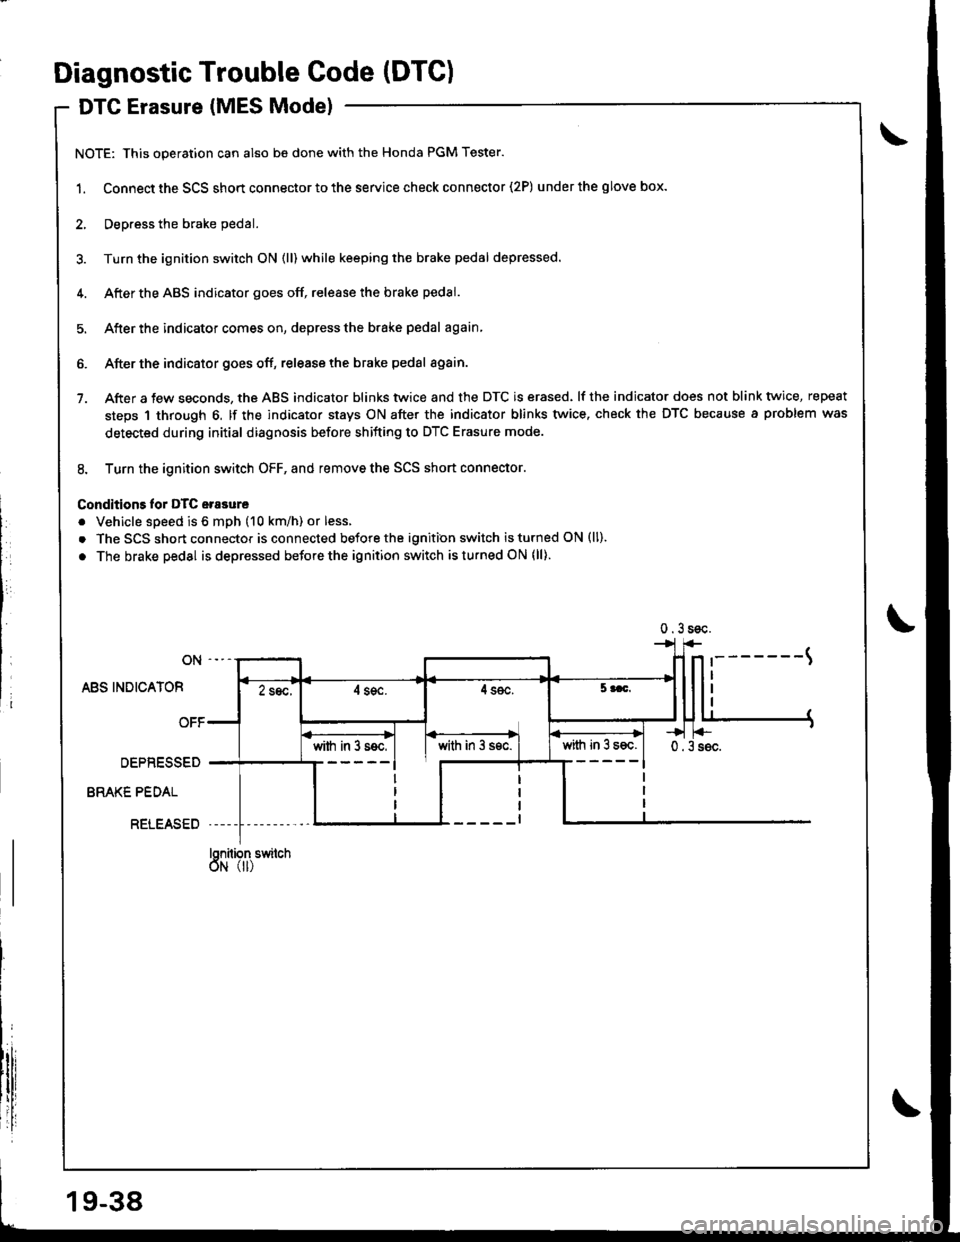 HONDA INTEGRA 1998 4.G Workshop Manual Diagnostic Trouble Code (DTC)
DTG Erasure (MES Mode)
NOTE: This operation can also be done with the Honda PGM Tester.
1. Connect the SCS short connector to the service check connector (2P) underthe gl